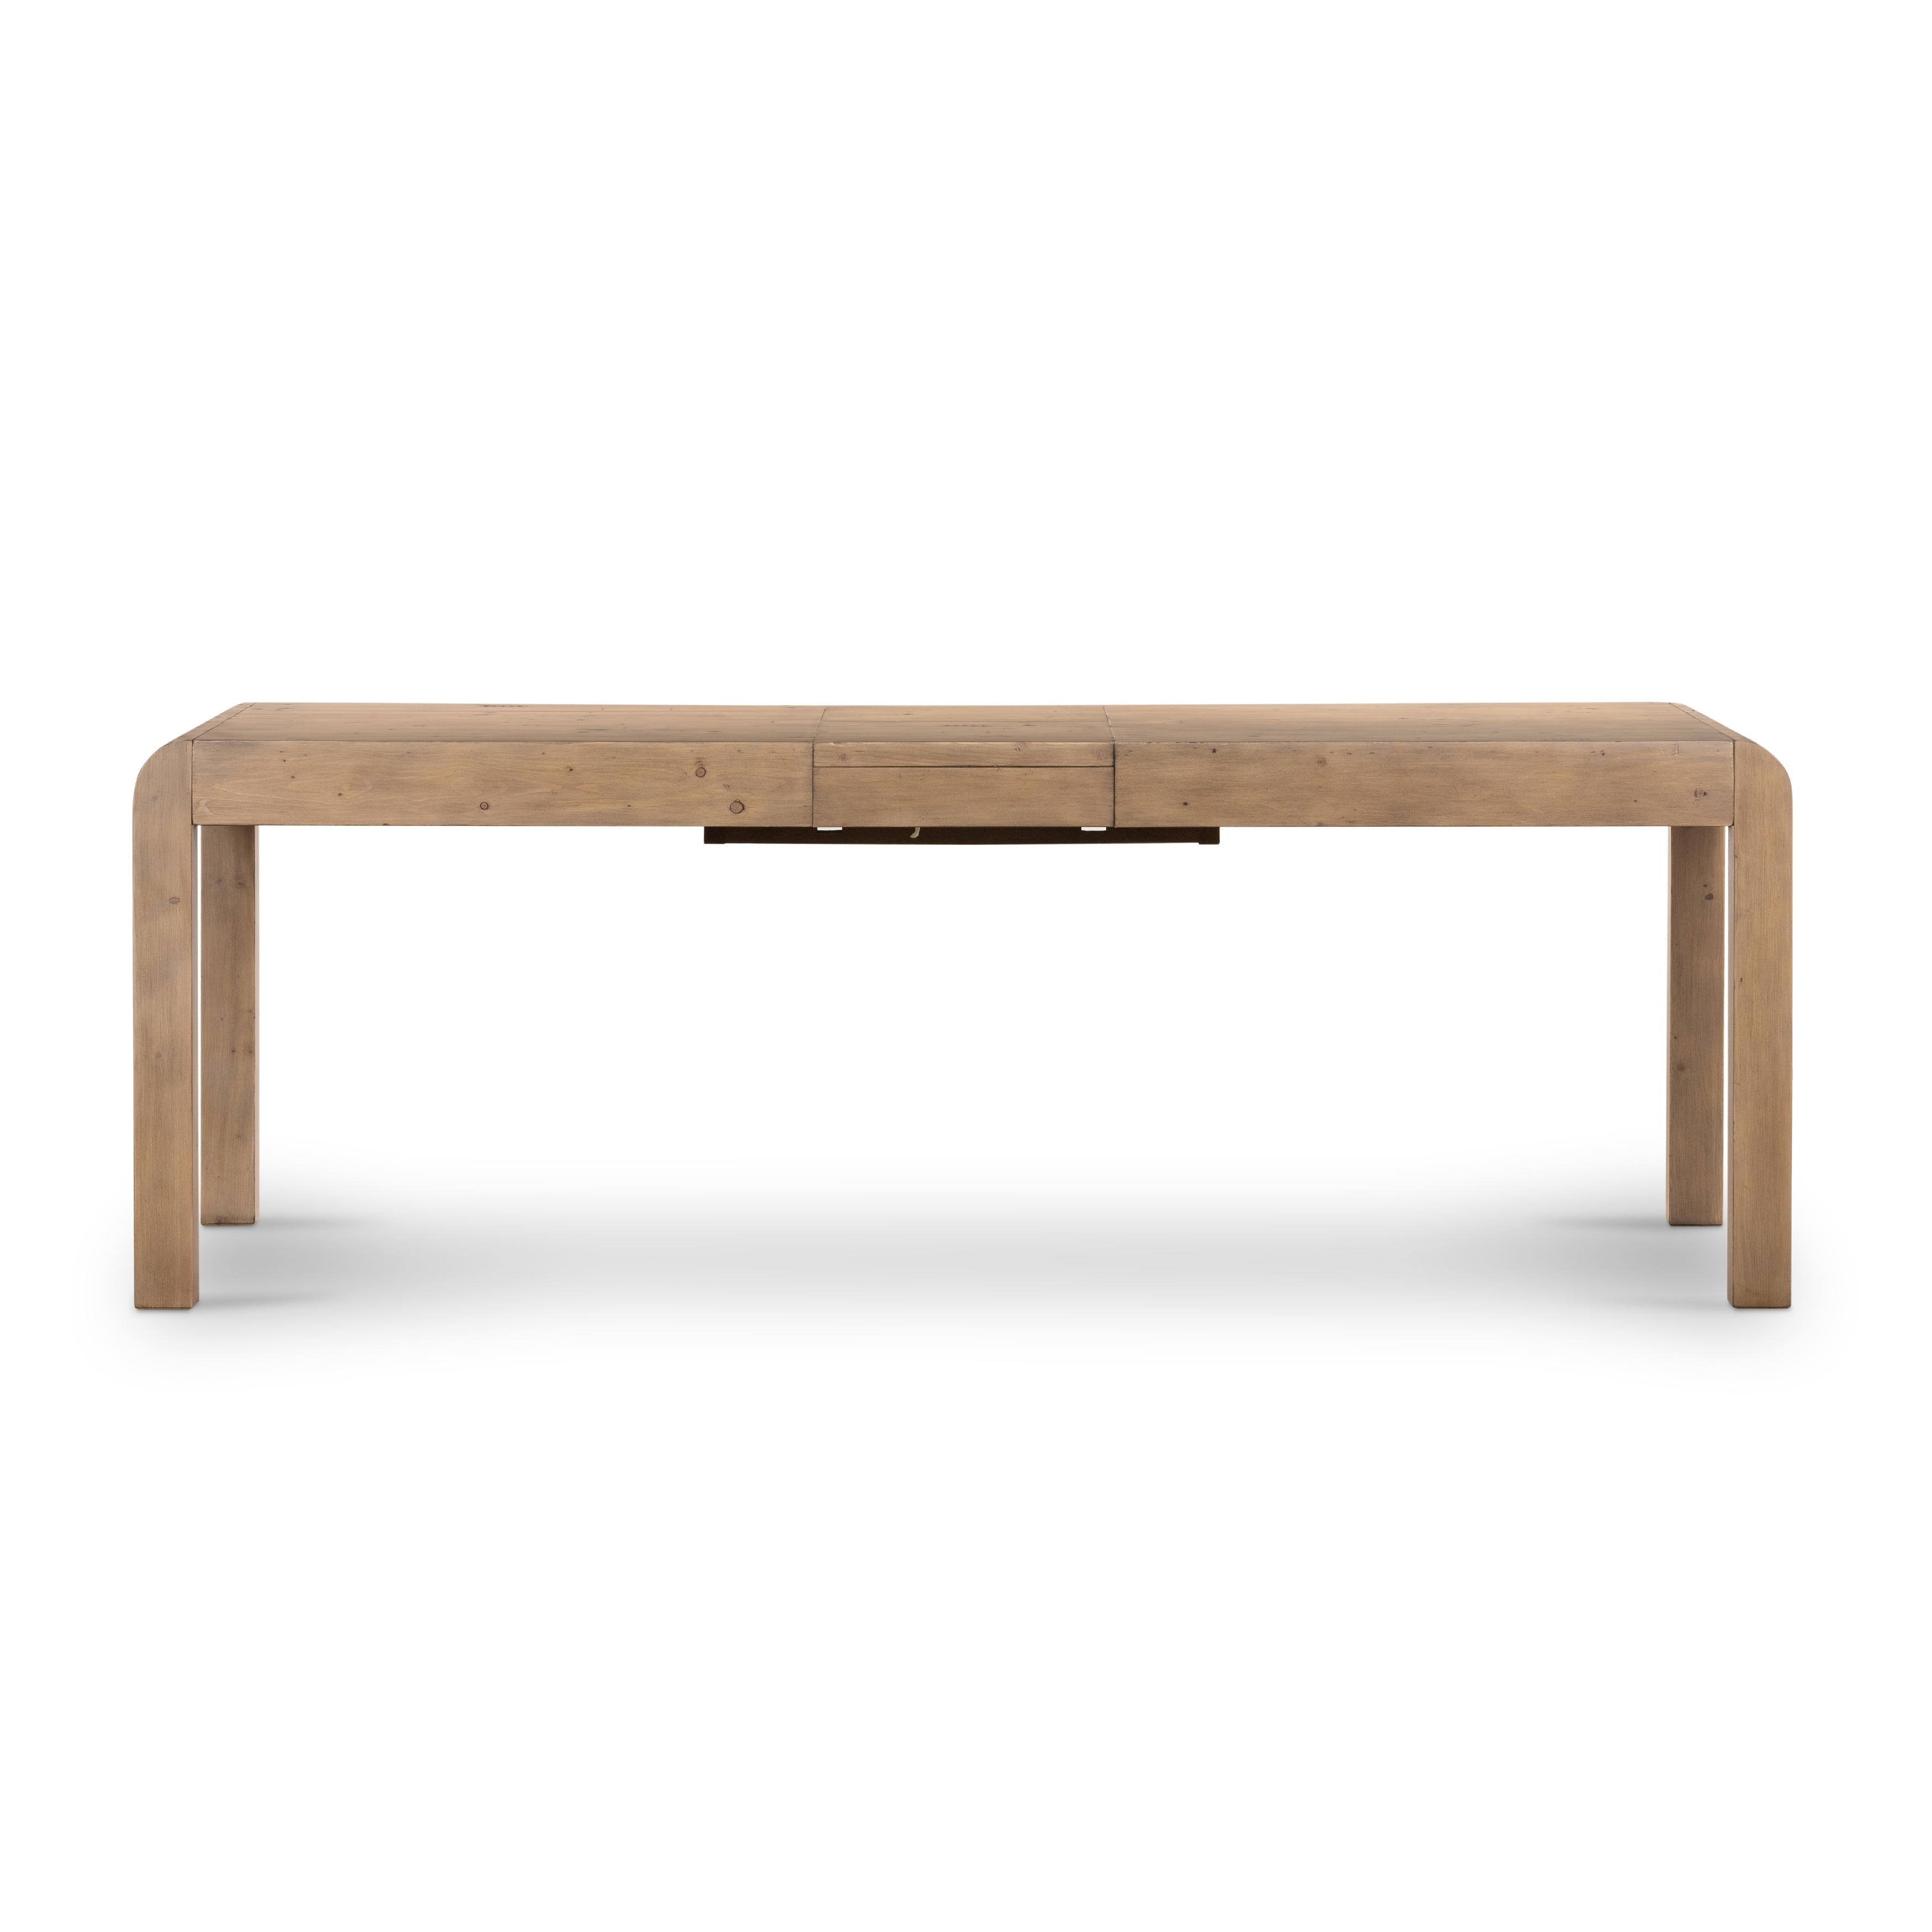 Everson 71" Extension Dining Table-Teak - Image 2